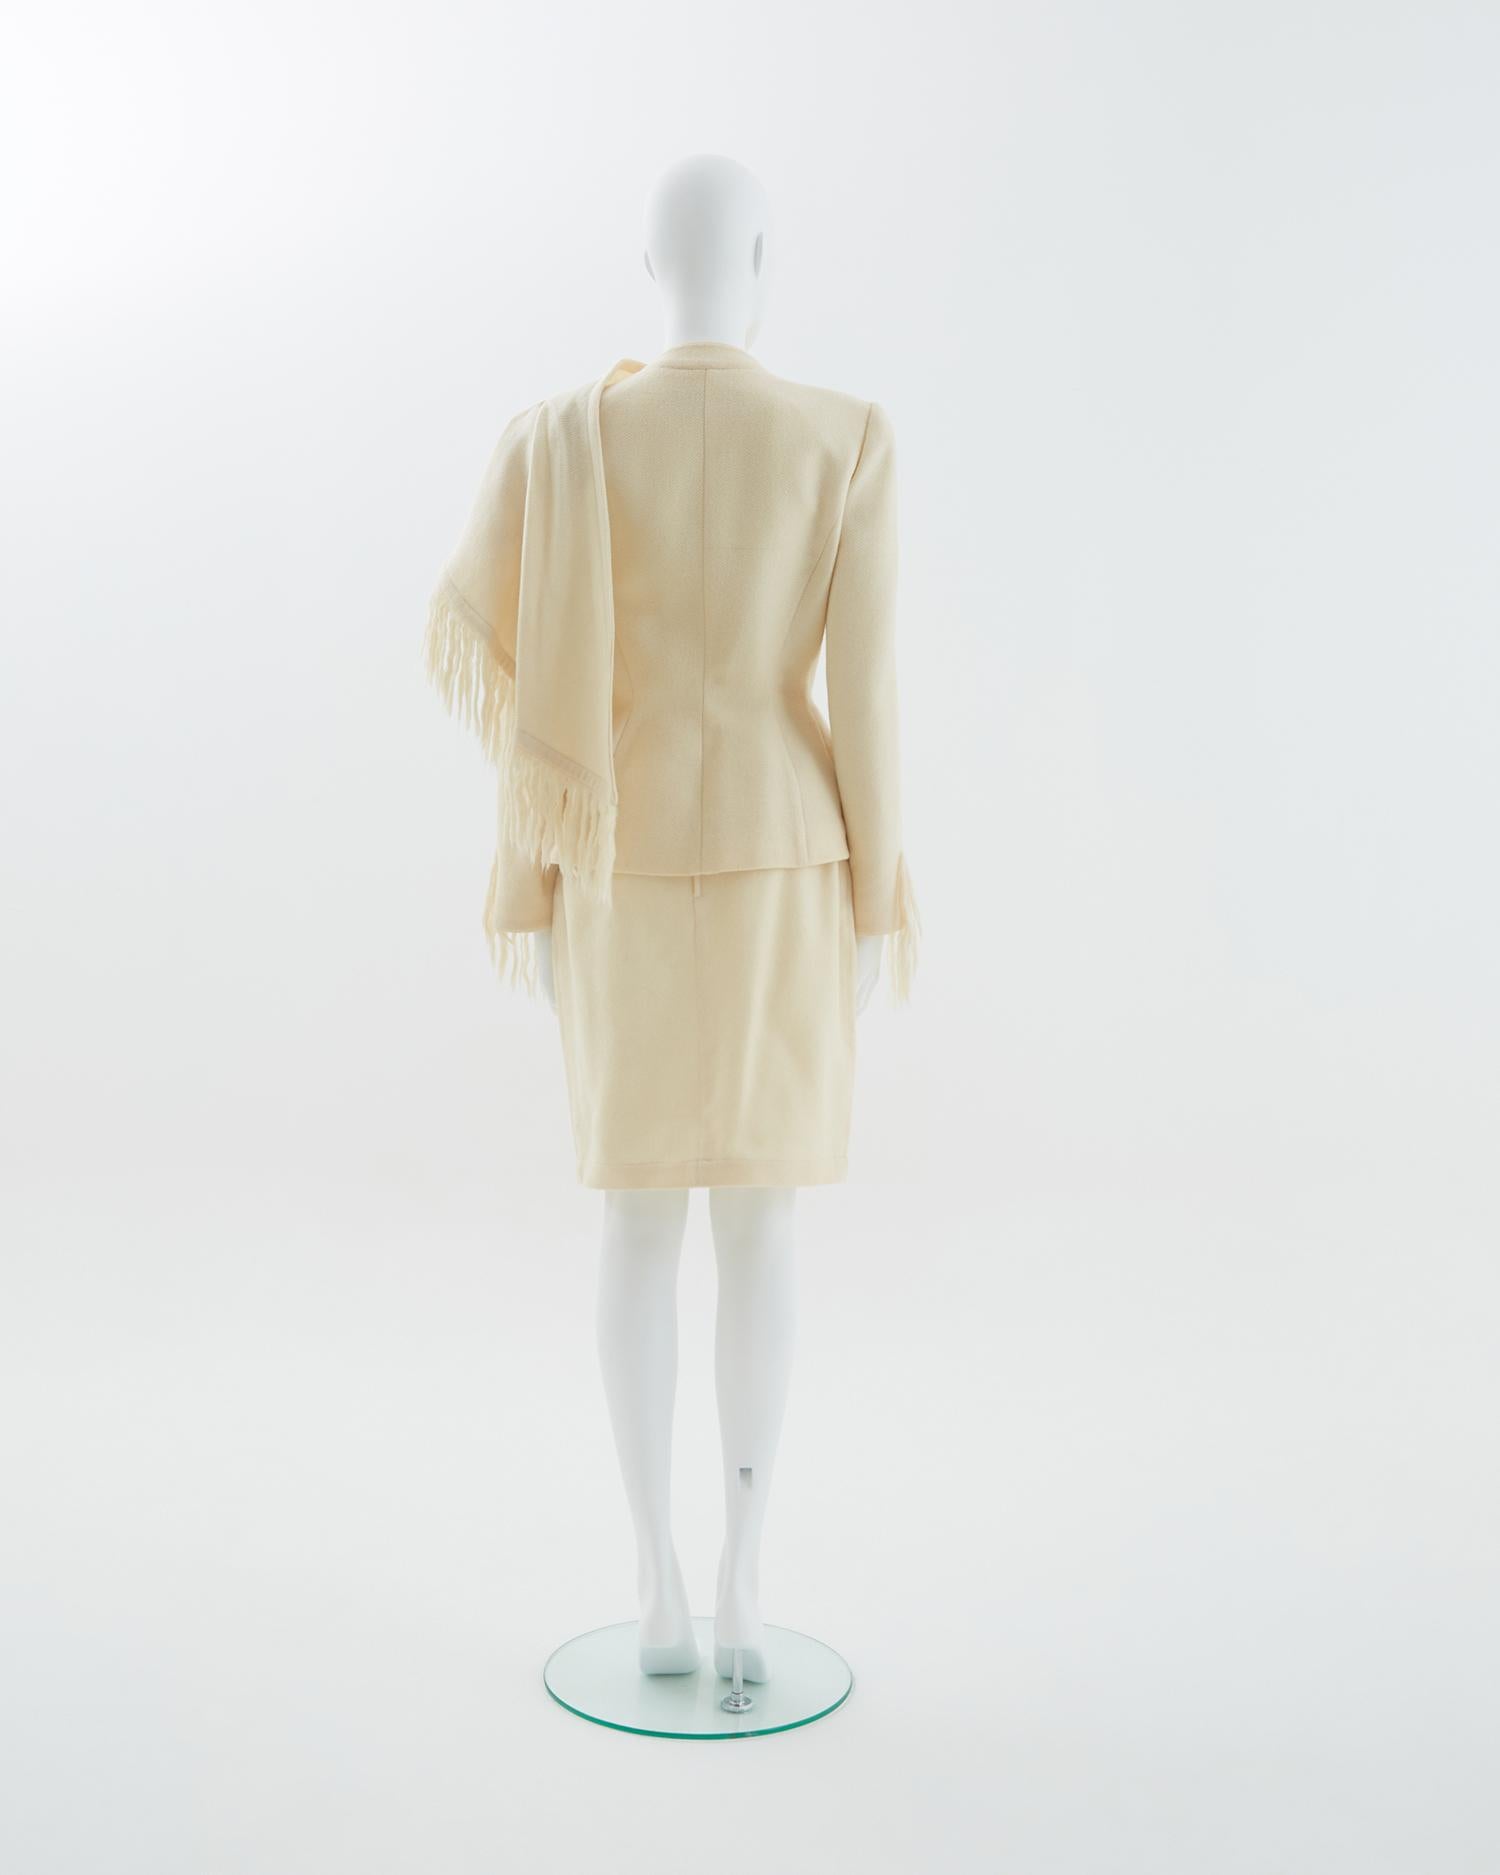 - Mohair off-white jacket with fringe scarf collar and cuffs detailing 
- Sold by Skof.Archive
- Fully lined and slightly padded shoulders
- Clasp fastenings at the front 
- Snap closure at the side 
- Fitted silhouettes 
- 1990s period

Size
FR 40